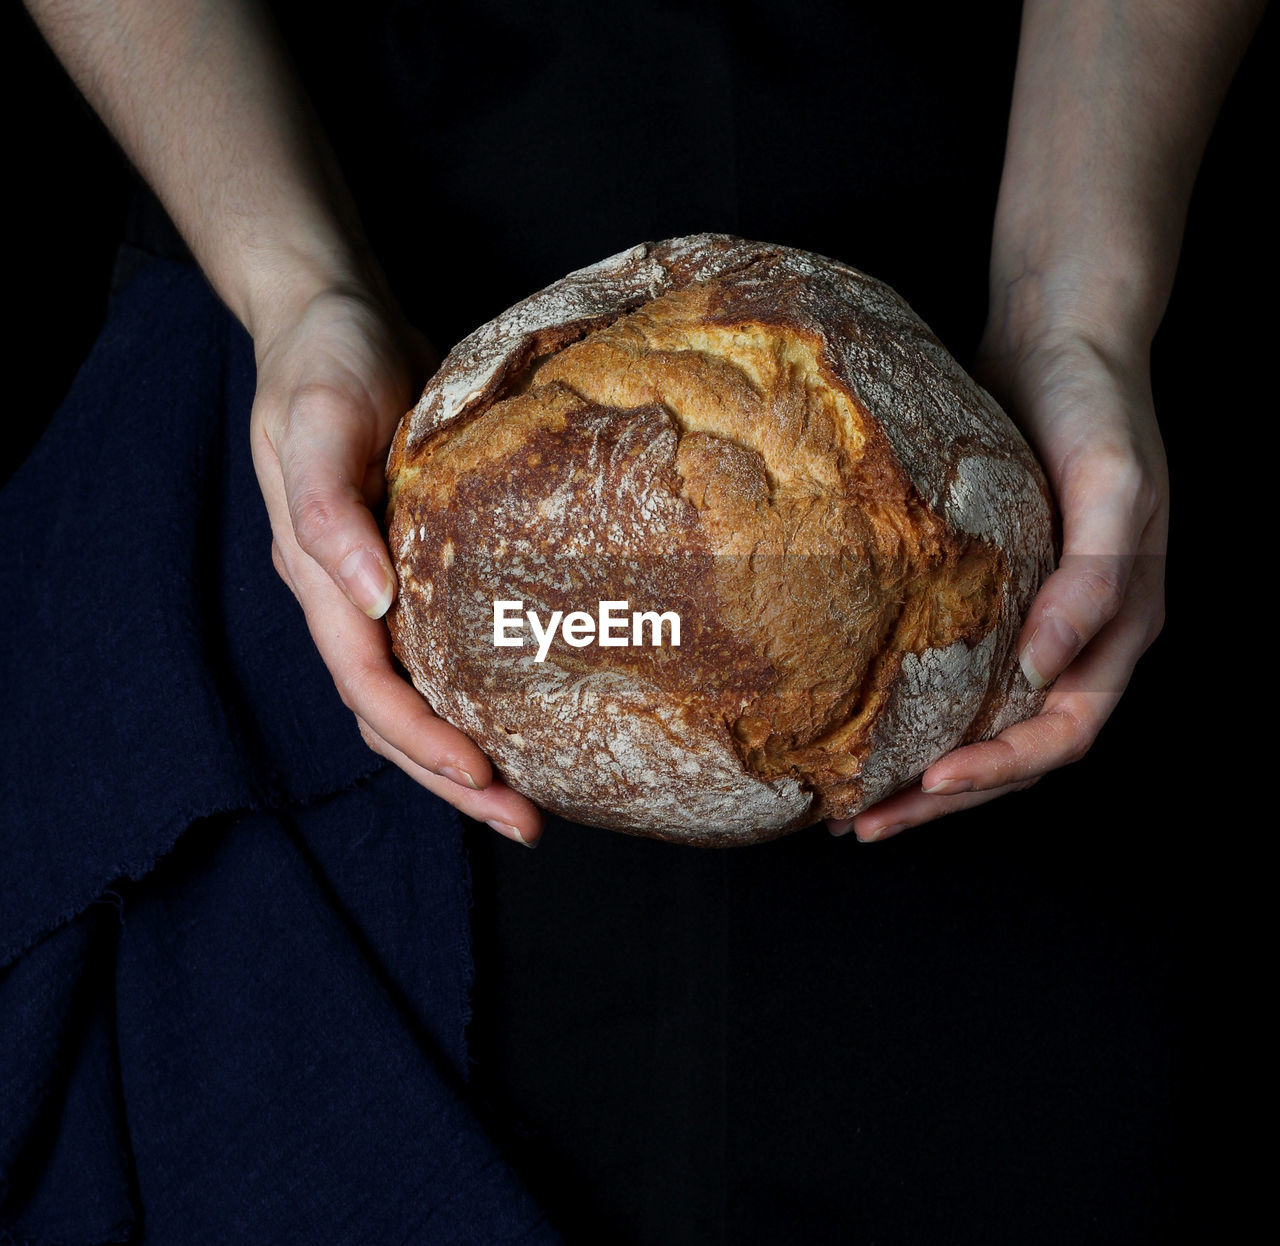 Round rustic bread held with the hands, above the black backdrop with the canvas on the left side